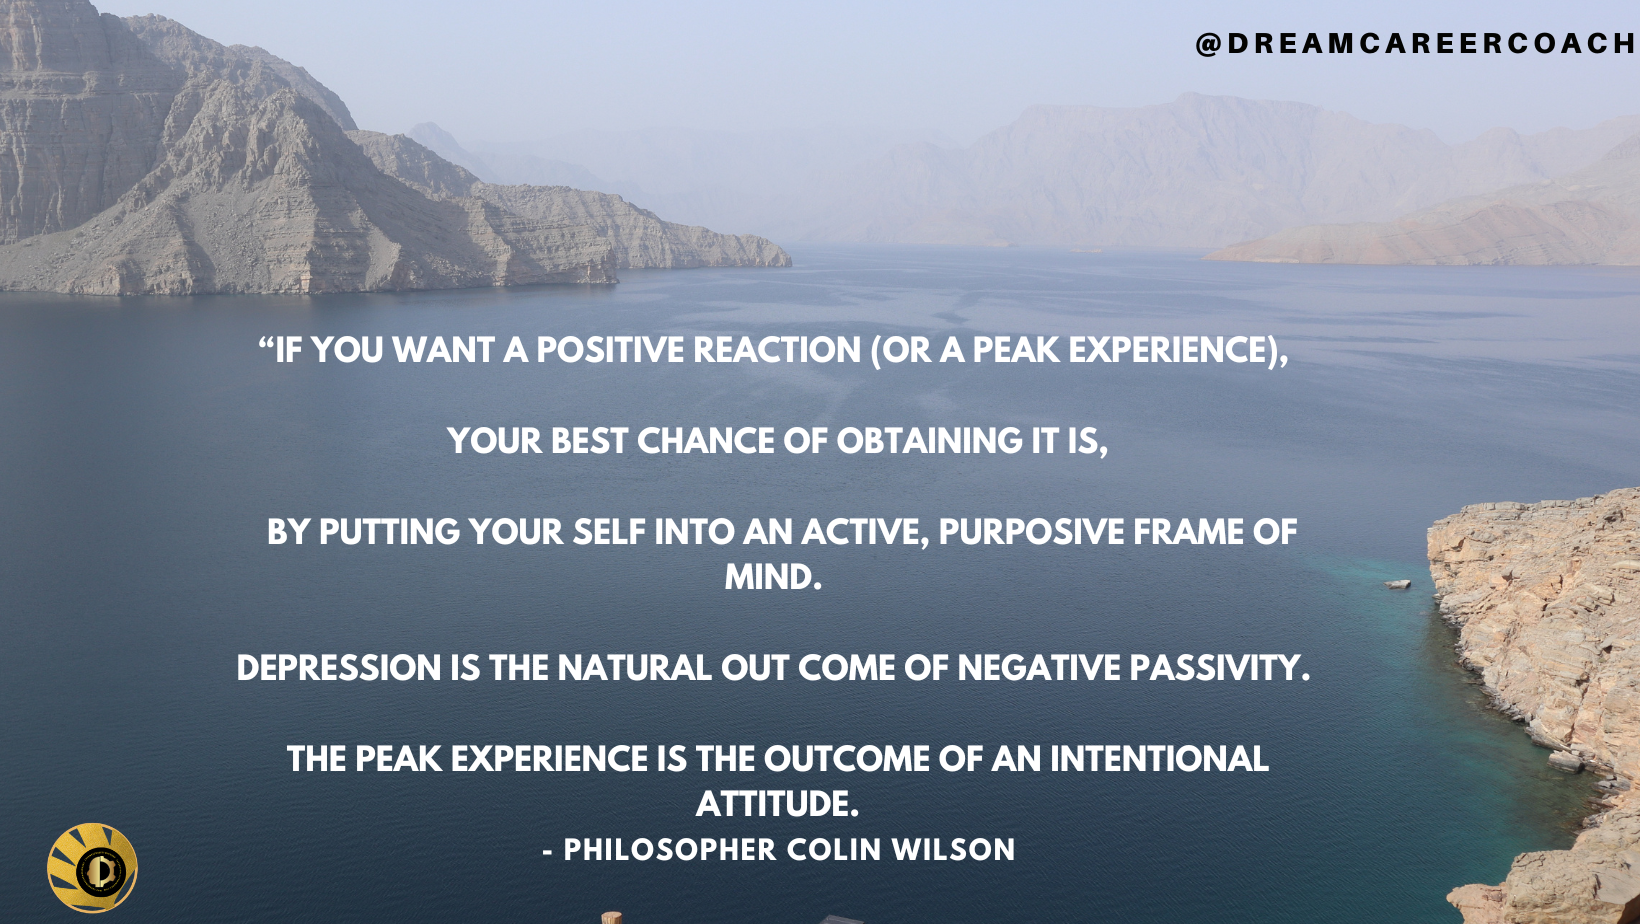 @DREAMCAREERCOACH

     

YOUR BEST CHANCE OF OBTAINING IT IS,

BY PUTTING YOUR SELF INTO AN ACTIVE, PURPOSIVE FRAME OF
L110 R ==

DEPRESSION IS THE NATURAL OUT COME OF NEGATIVE PASSIVITY.

THE PEAK EXPERIENCE IS THE OUTCOME OF AN INTENTIONAL
ATTITUDE.

&amp;) - PHILOSOPHER COLIN WILSON